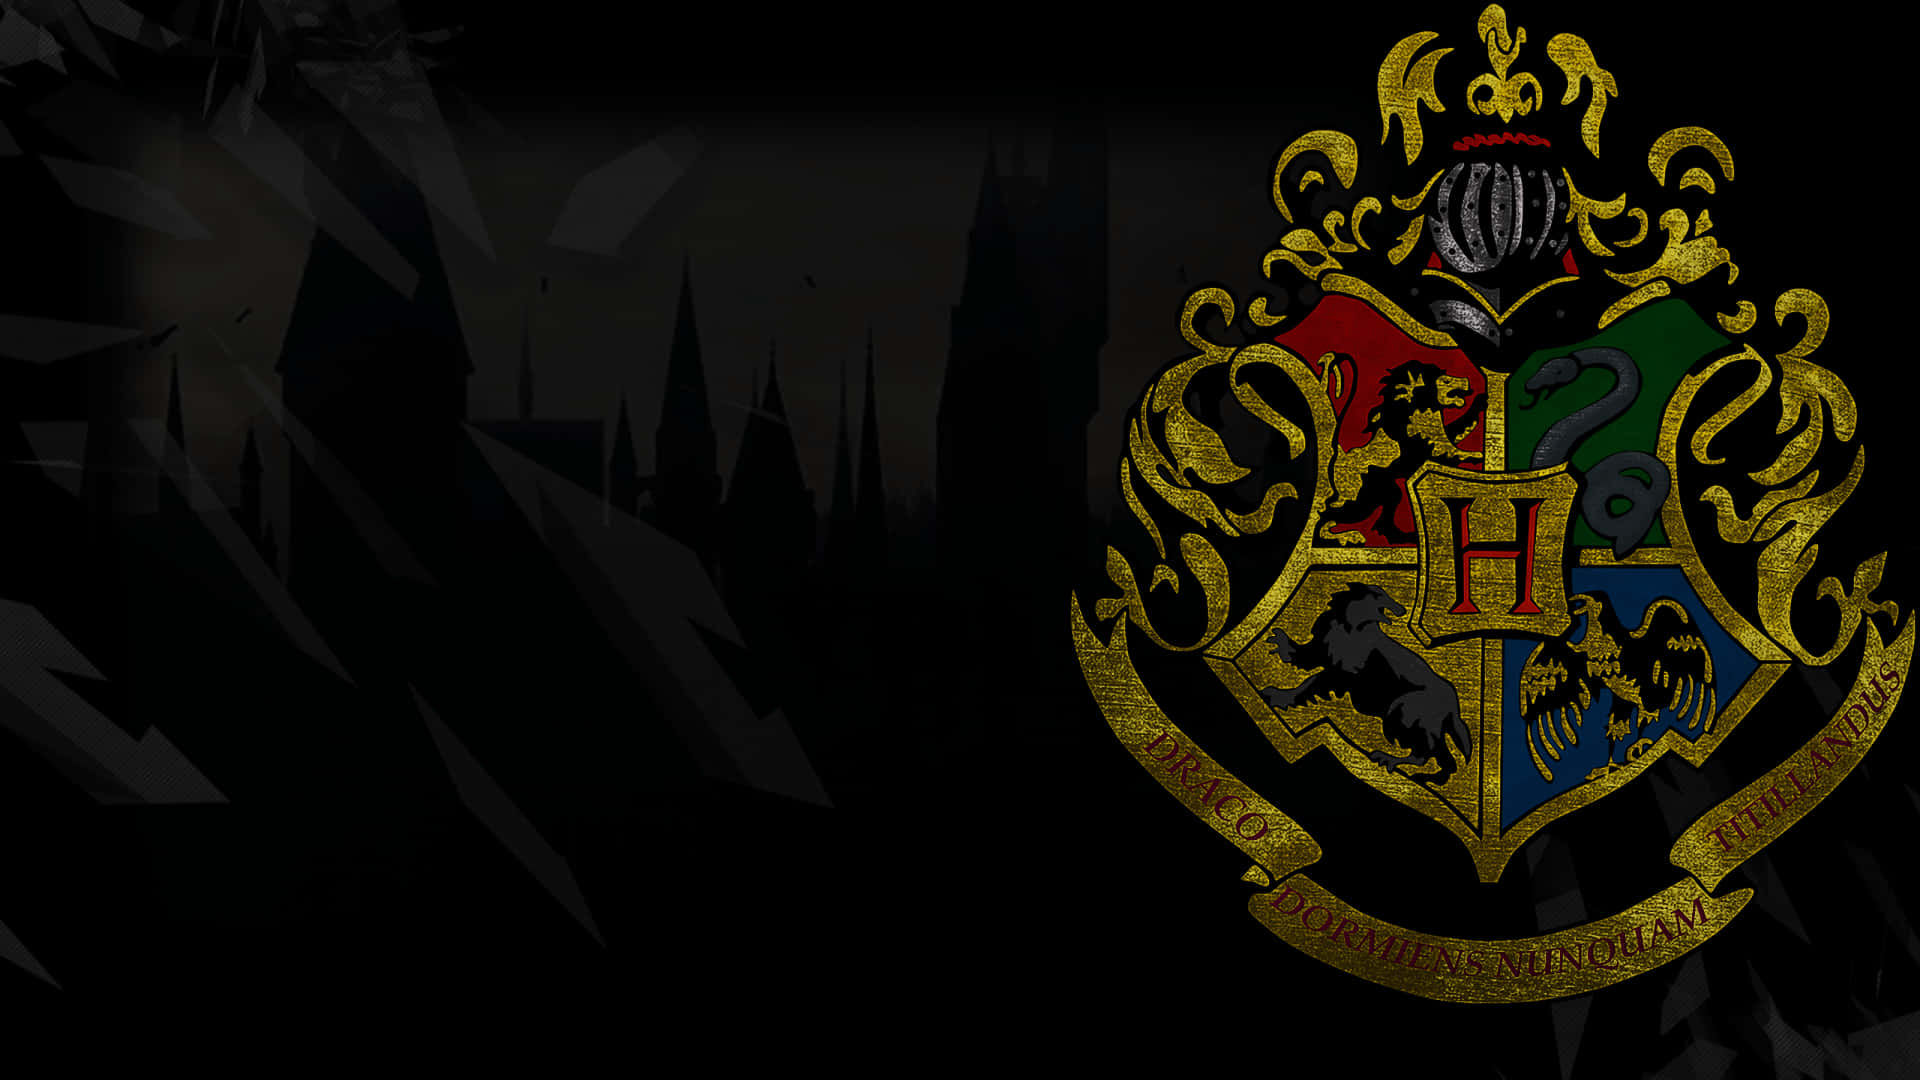 "Welcome to Ravenclaw, where wit and wisdom prevail!" Wallpaper